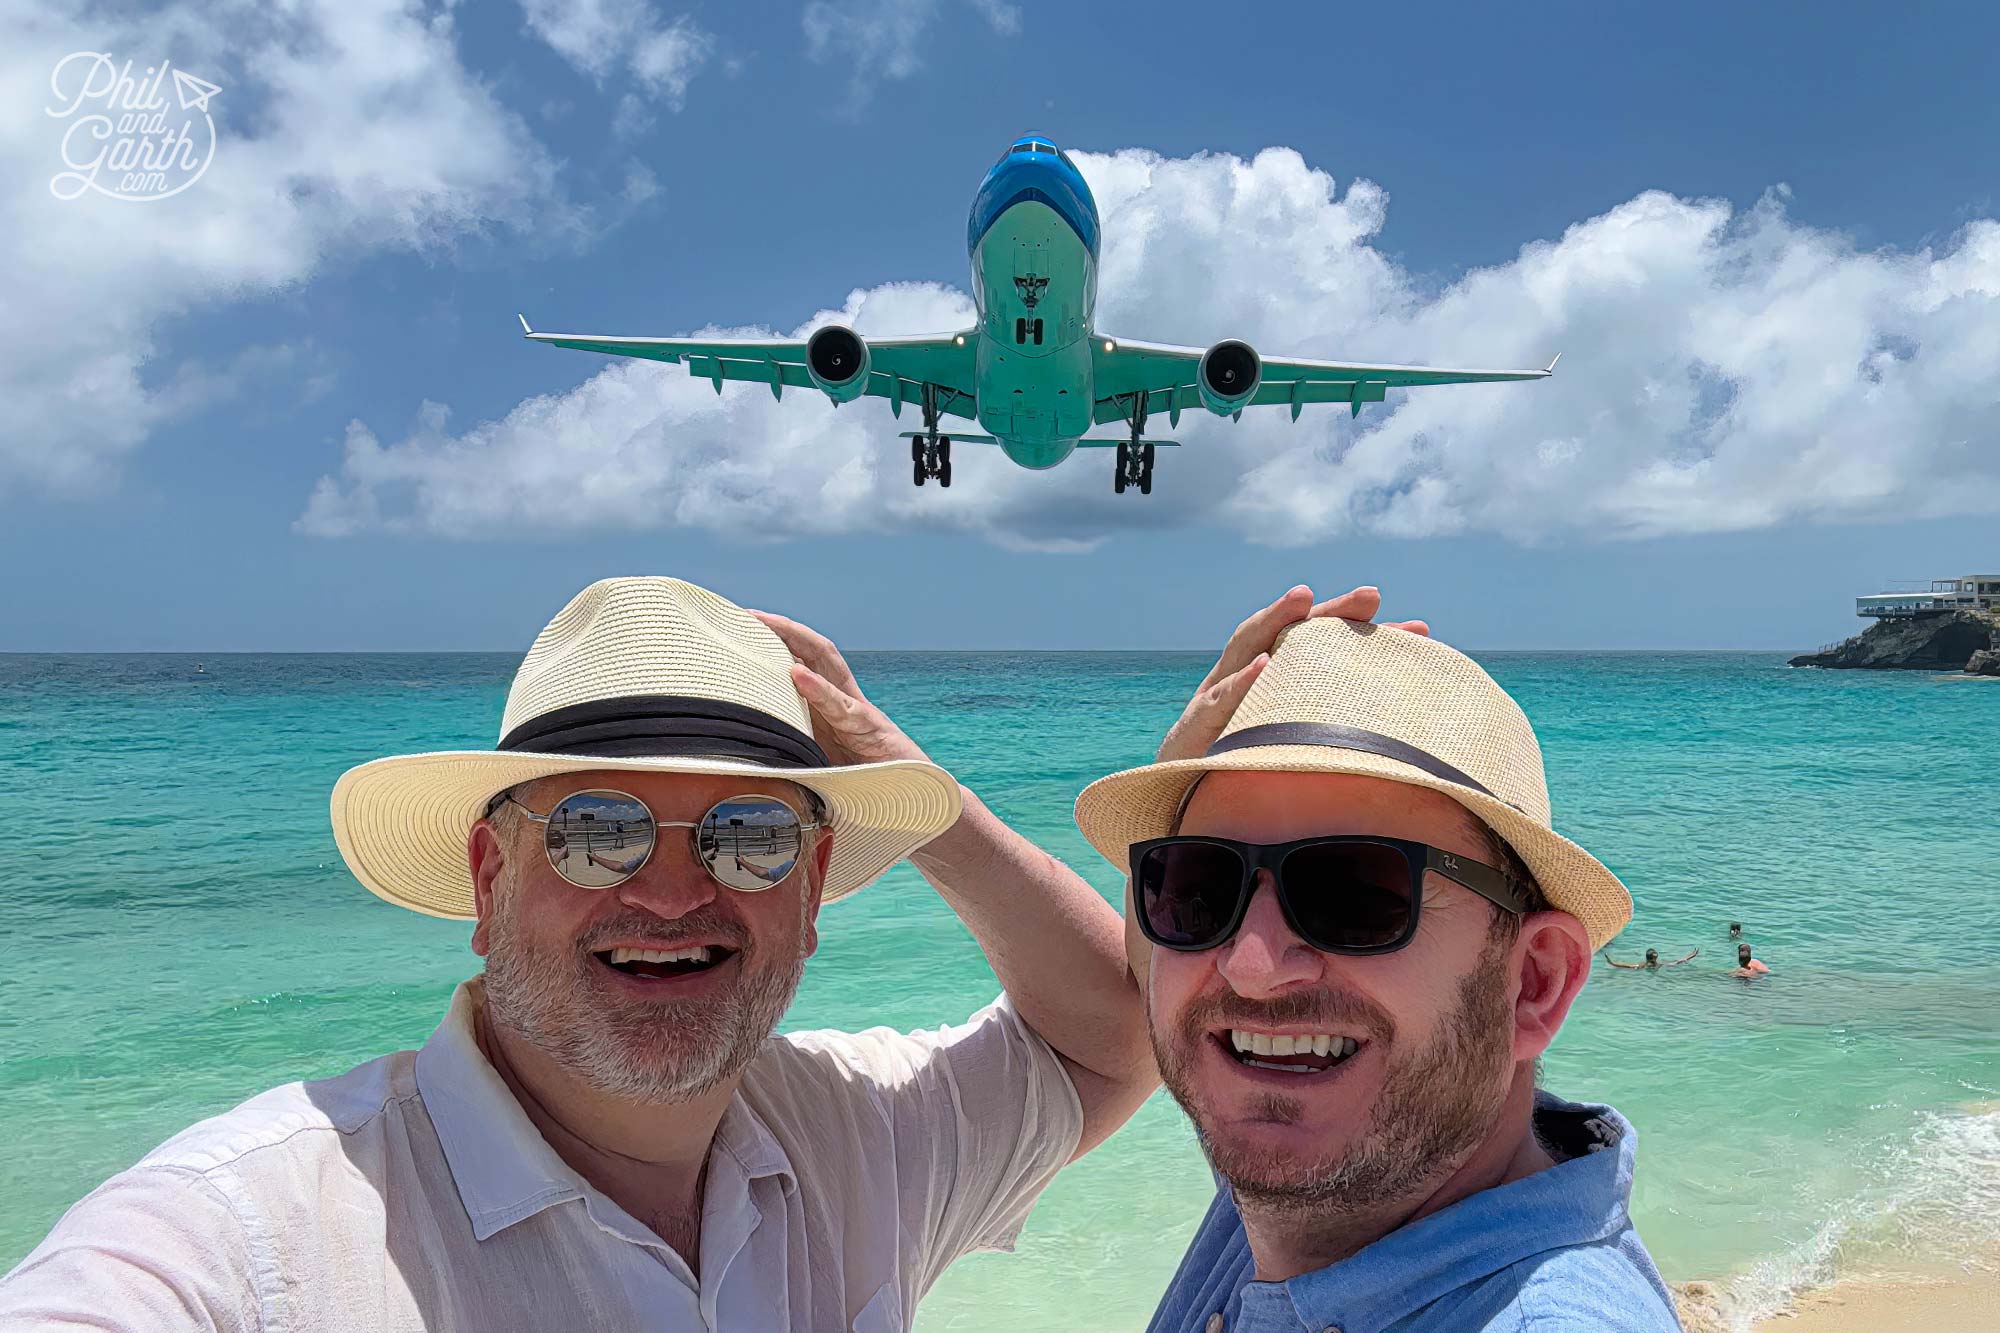 Phil and Garth on Maho Beach as a KLM plane comes into land